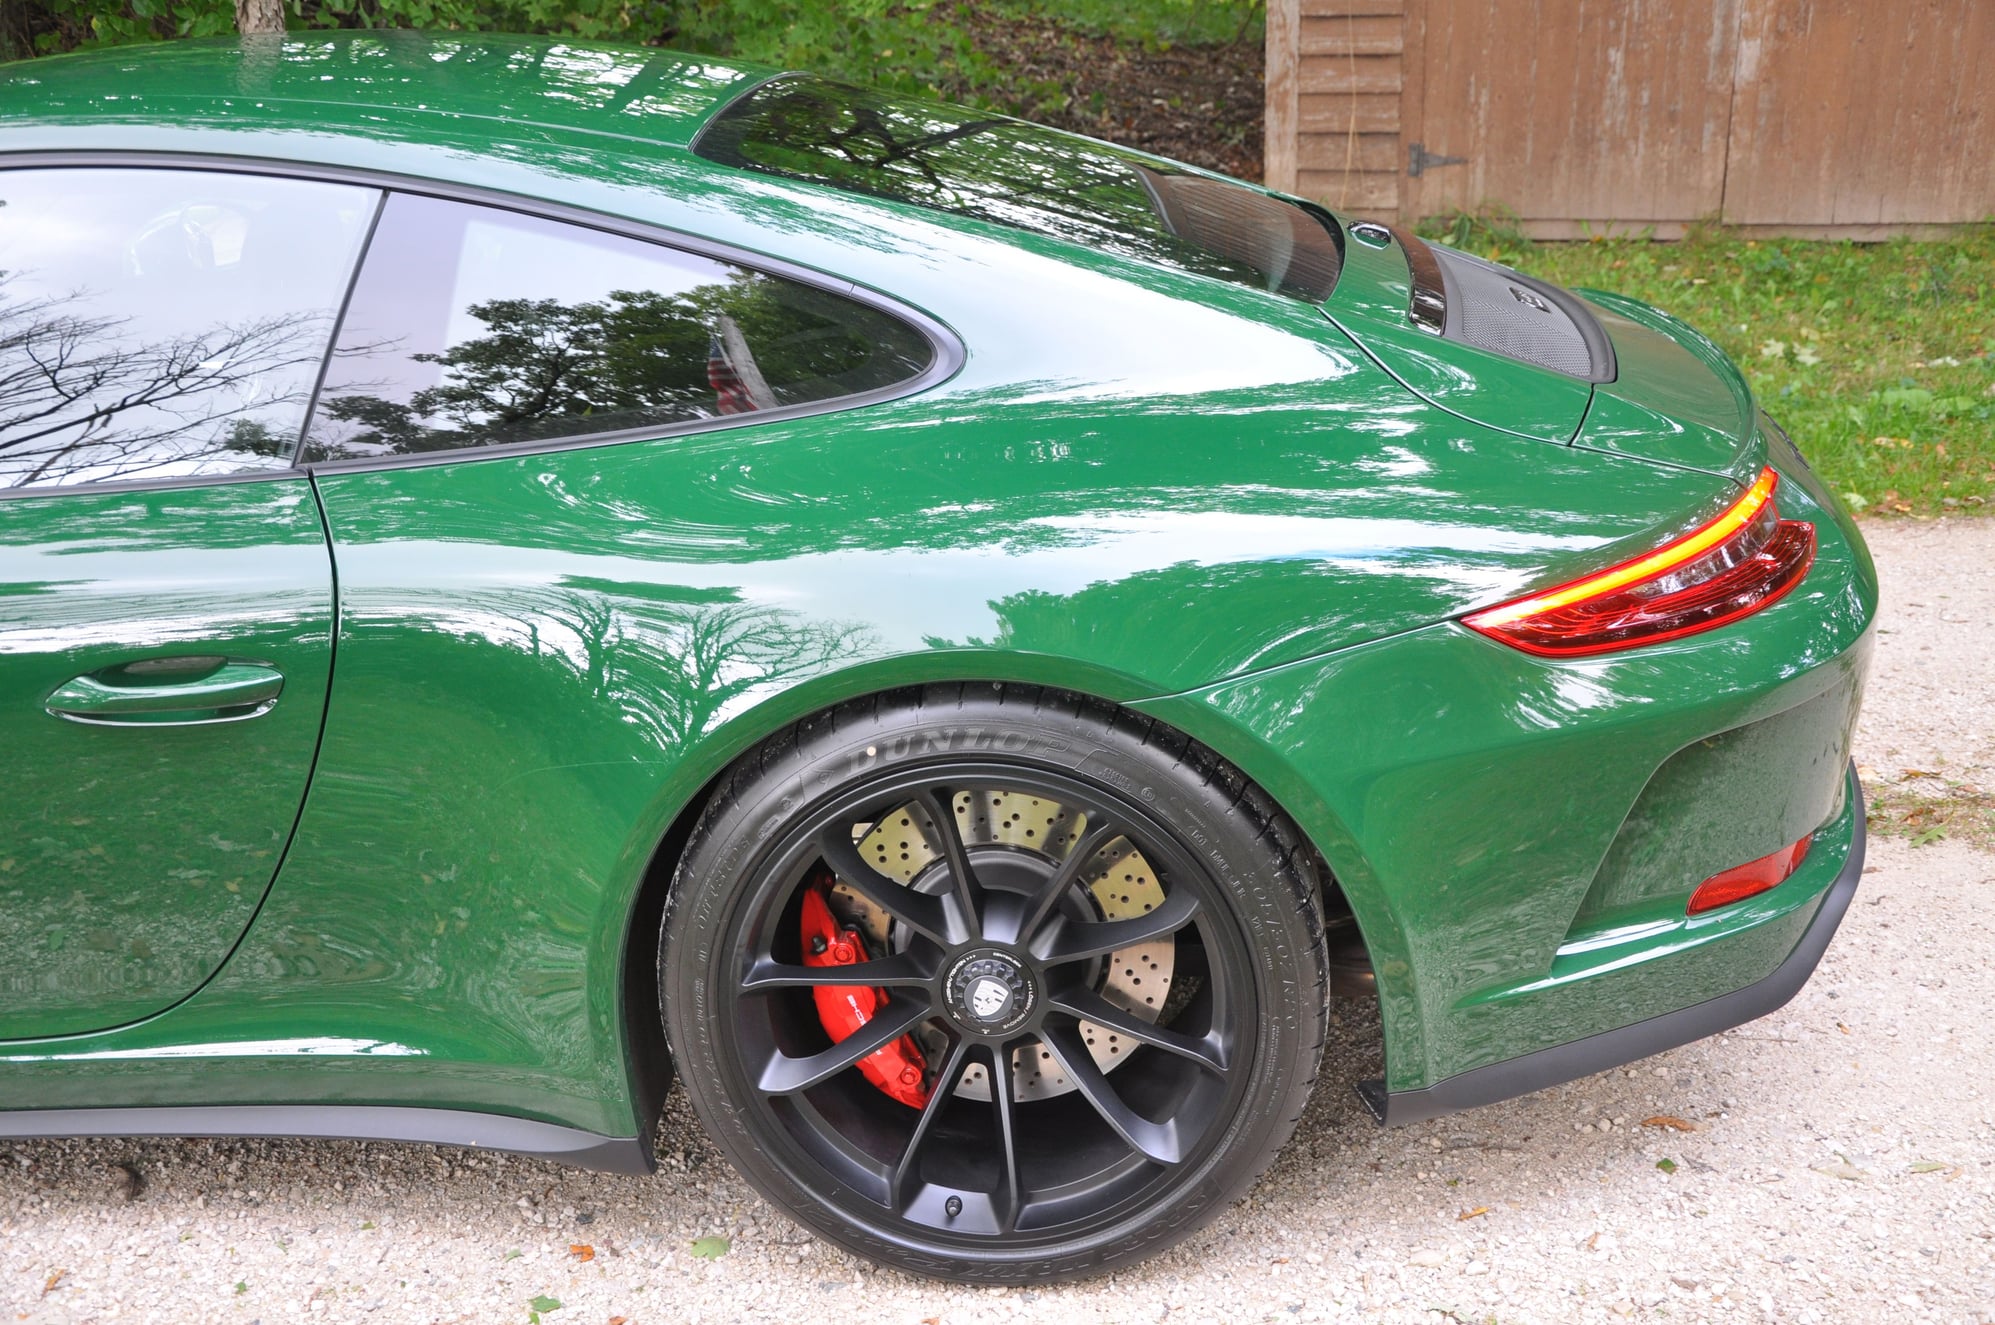 2018 Porsche GT3 - Stunning Irish Green GT3 Touring - Used - VIN WP0AC2A95JS176195 - 757 Miles - 6 cyl - 2WD - Manual - Coupe - Other - Plymouth, WI 53073, United States